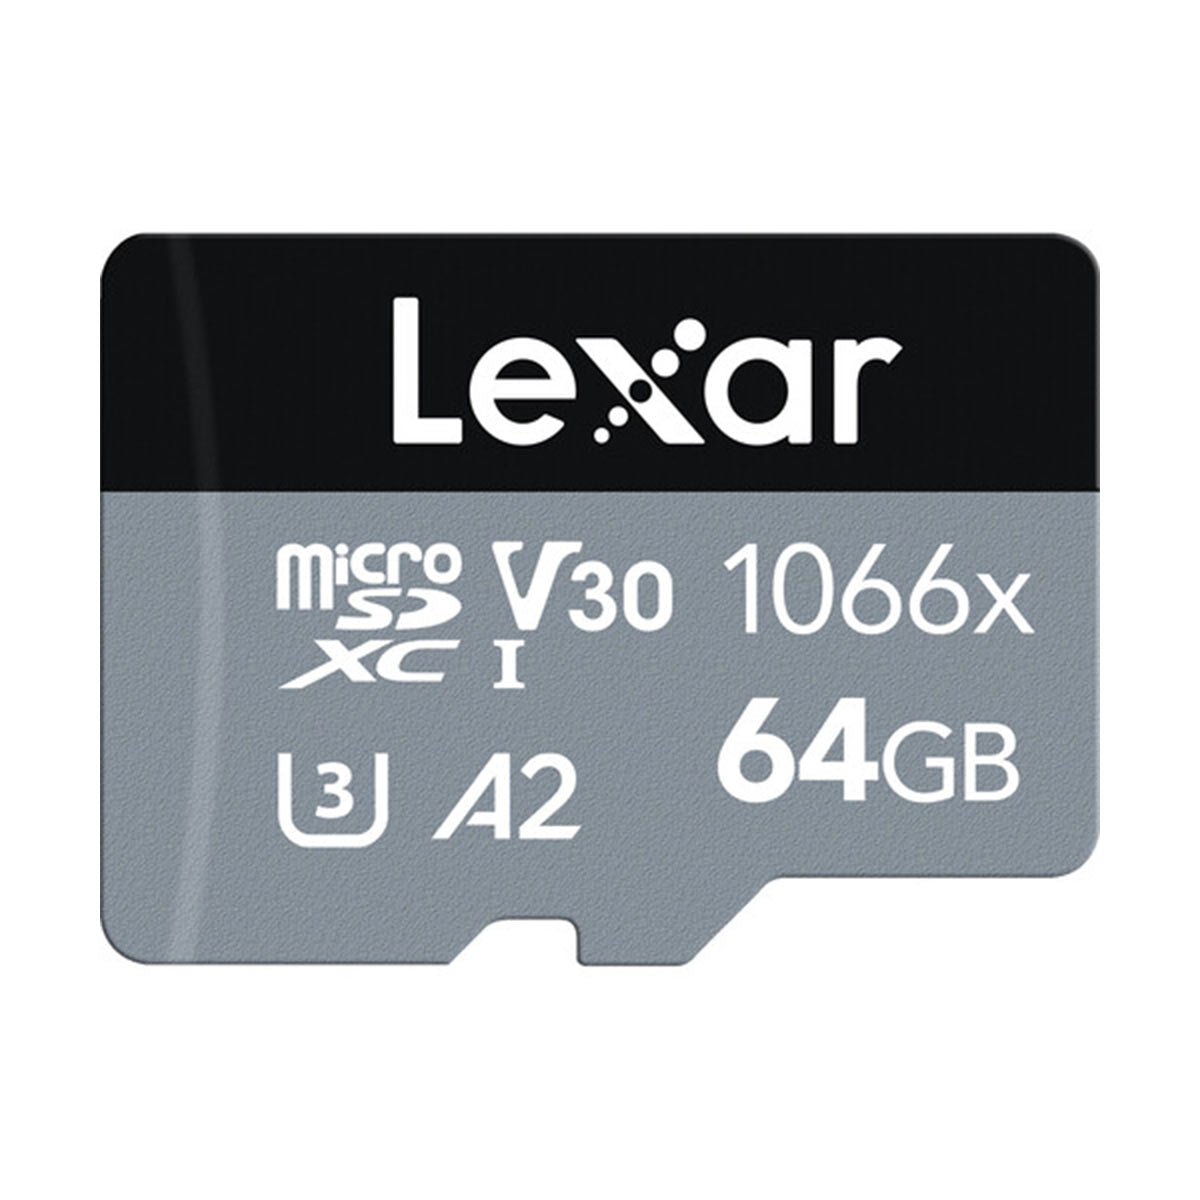 Lexar 64GB Professional 1066x UHS-I microSDXC Memory Card with SD Adapter